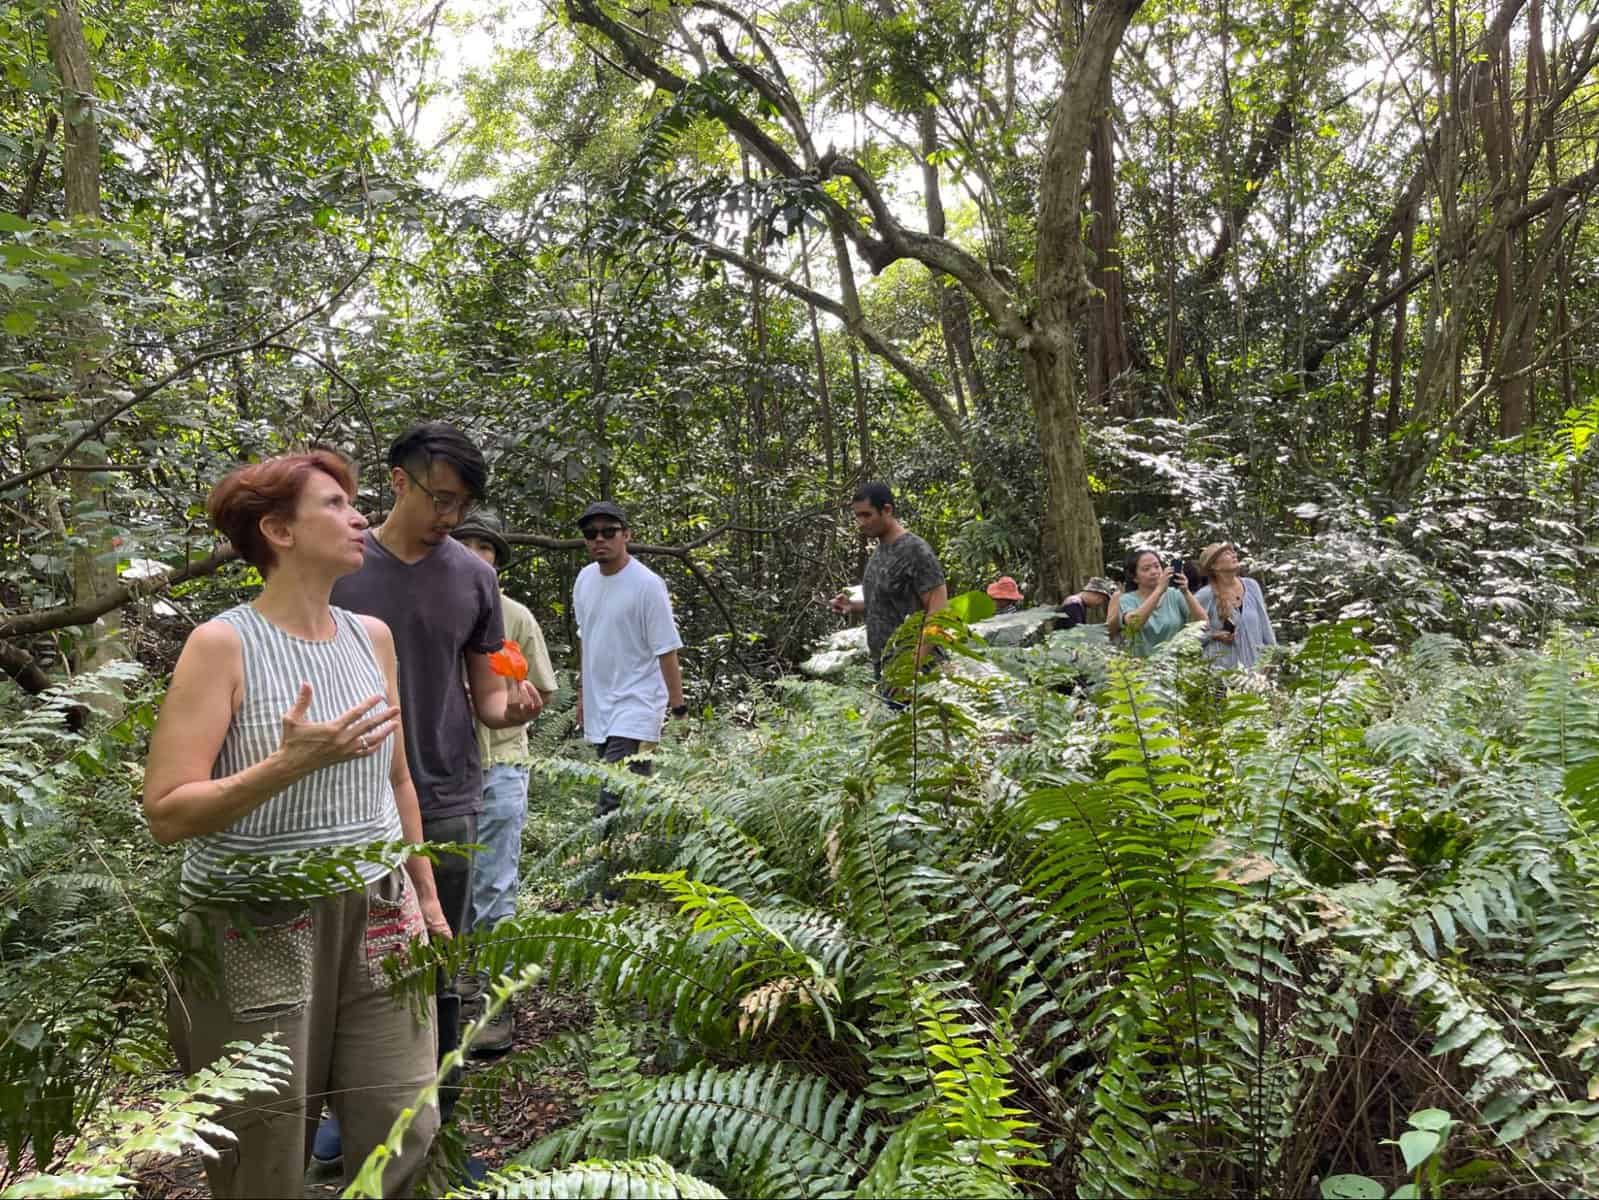 Jireh Koh exploring the landscape around Singapore's Turf Club Road with artist Isabelle Desjeux